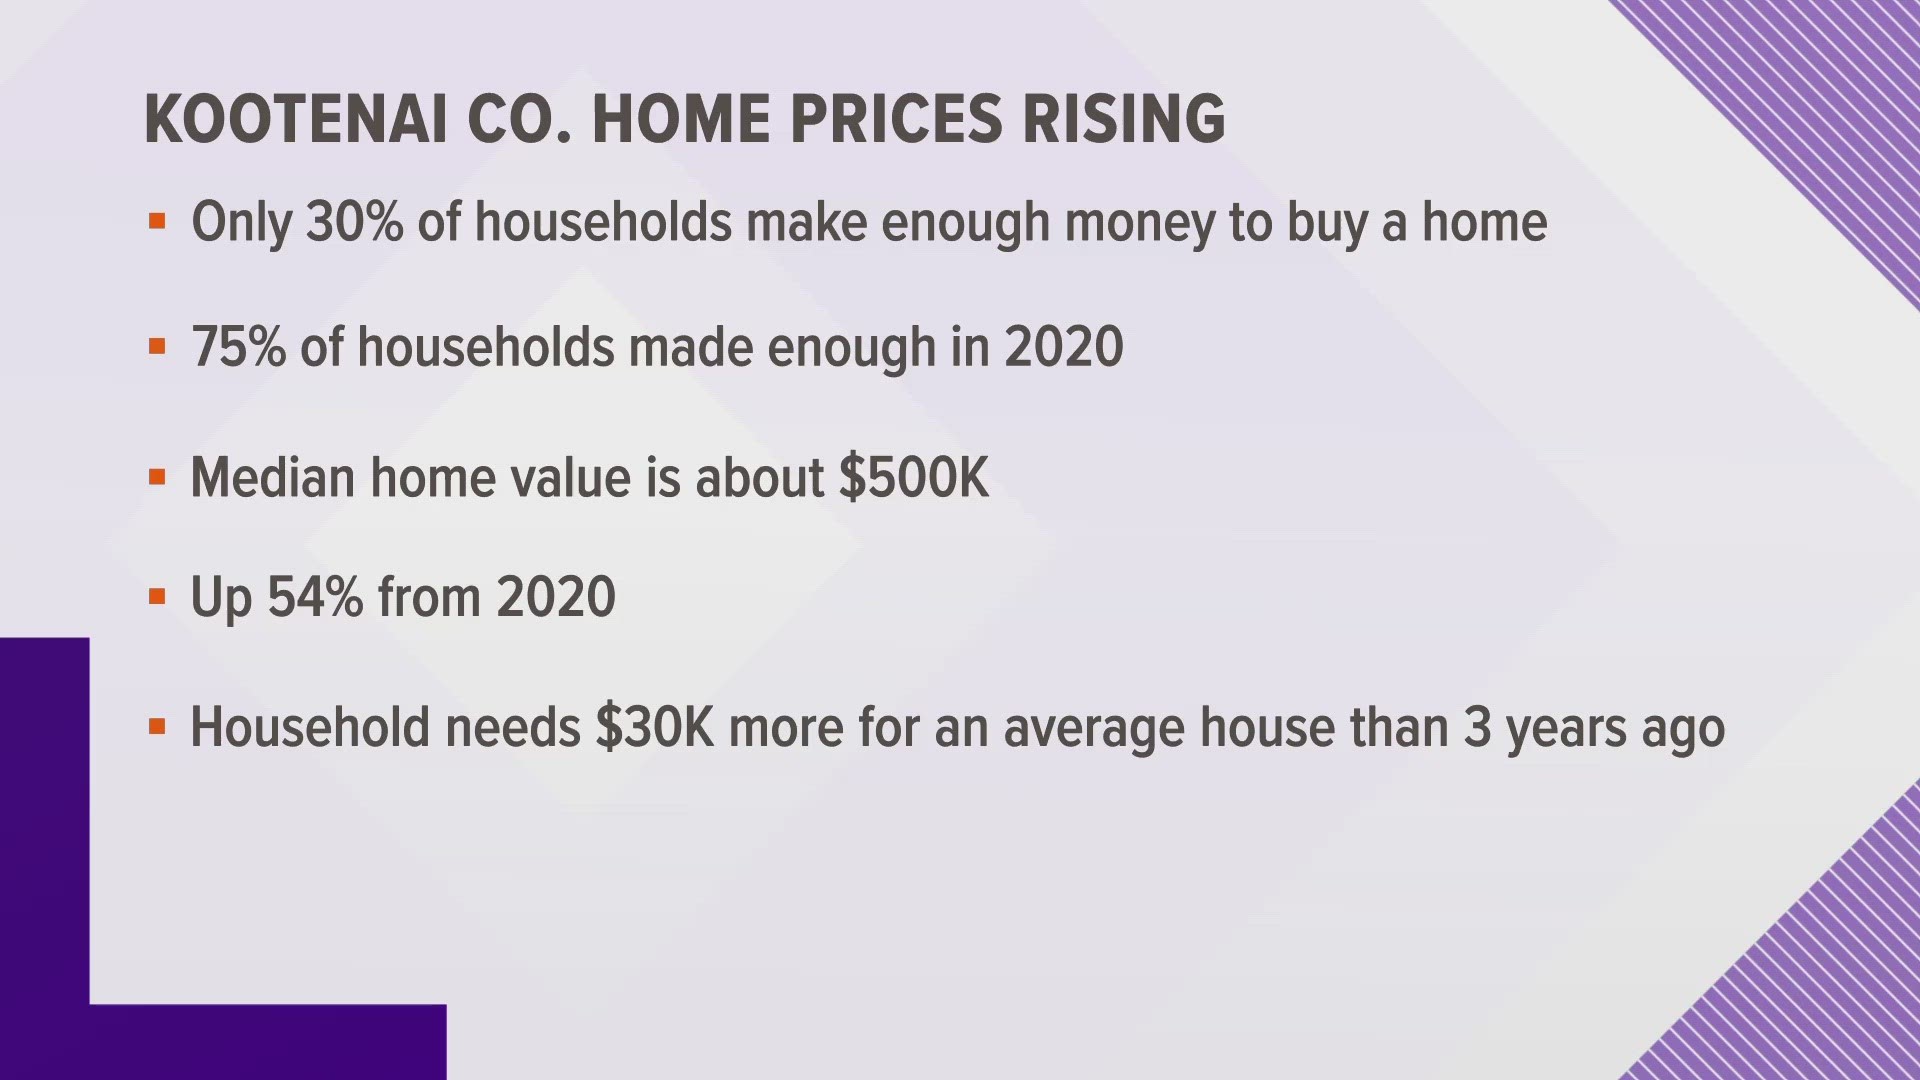 Just 30% of households in Kootenai County make enough to buy a home.